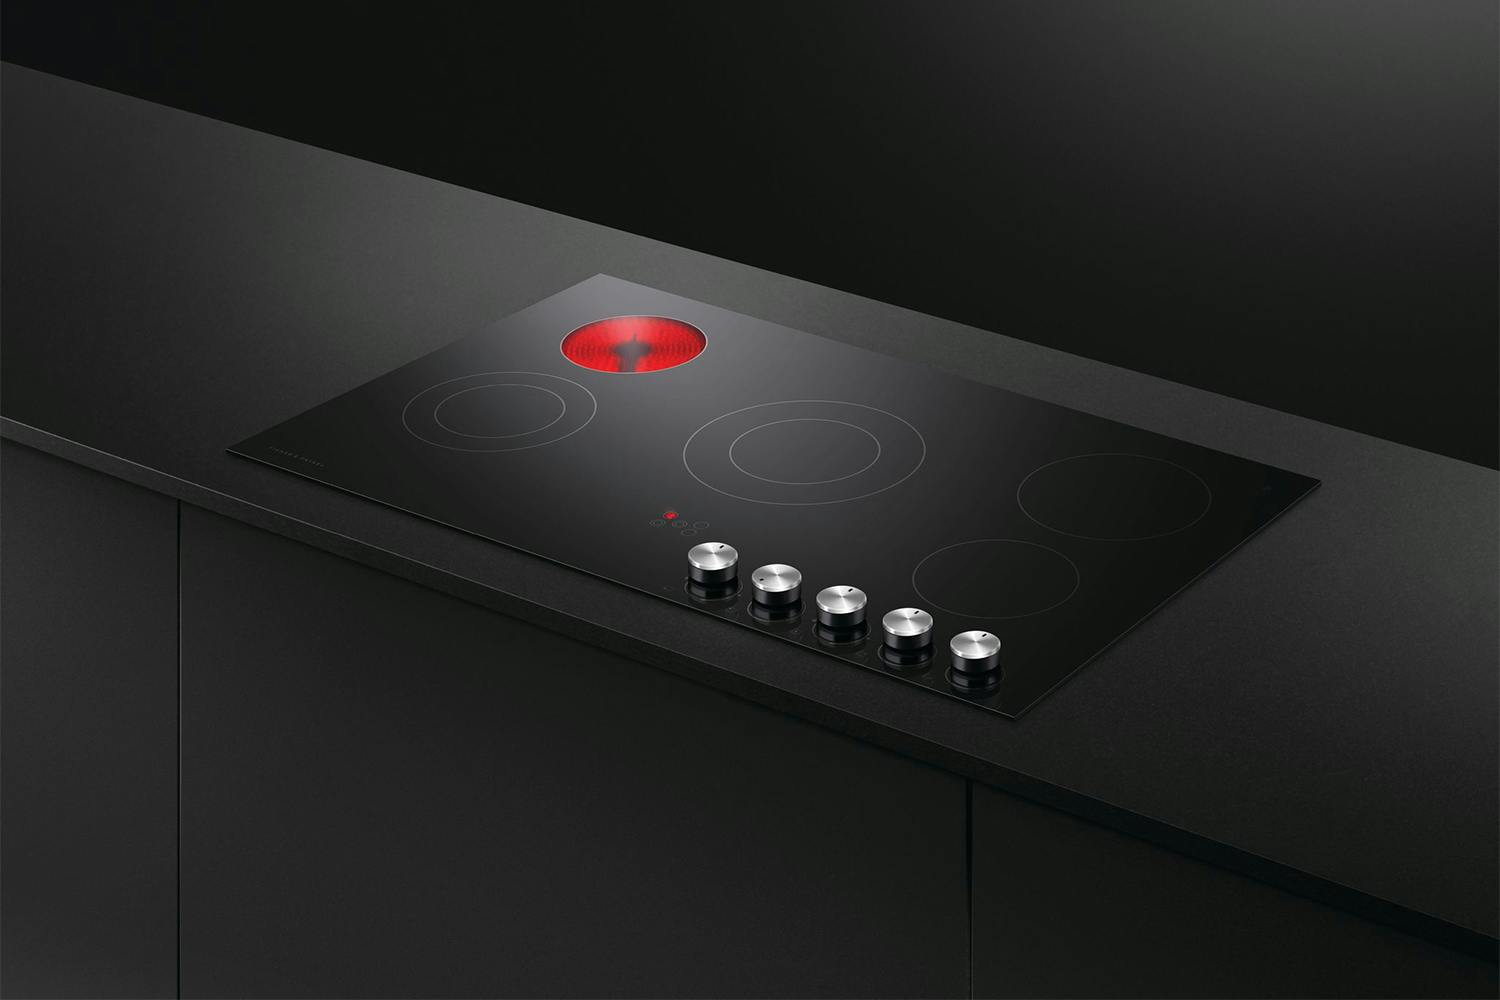 Fisher & Paykel 90cm Ceramic Cooktop - Black Glass